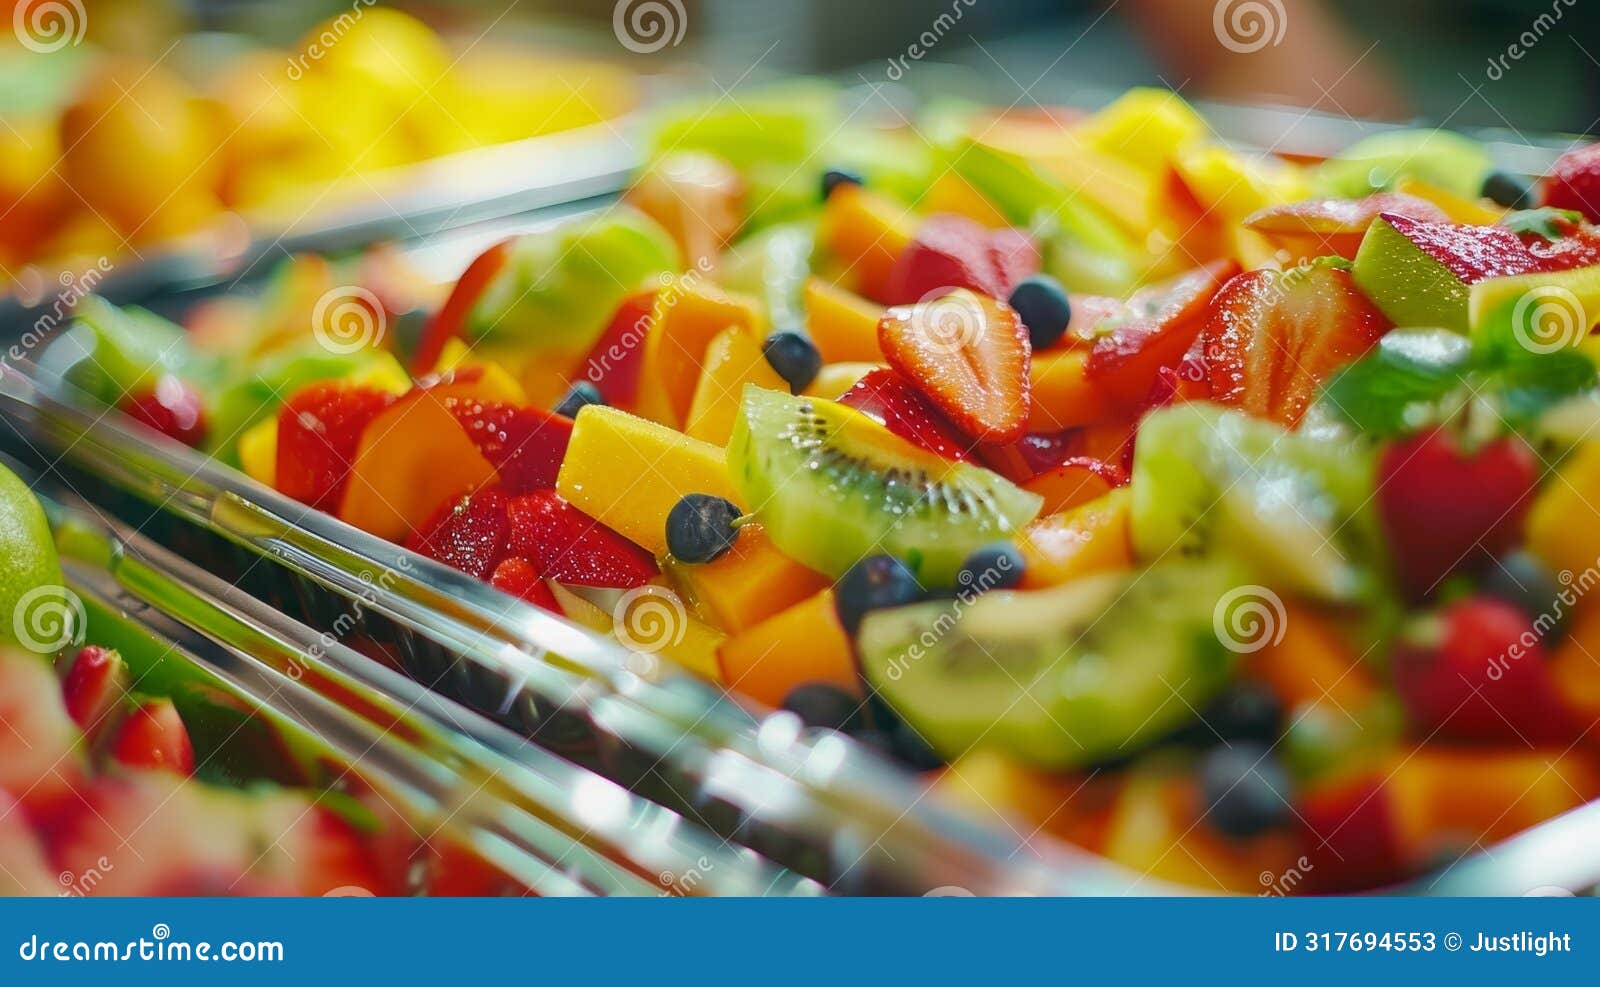 the camera zooms in on a tray of colorful and exotic fruits and veggies ready to be incorporated into the next dish